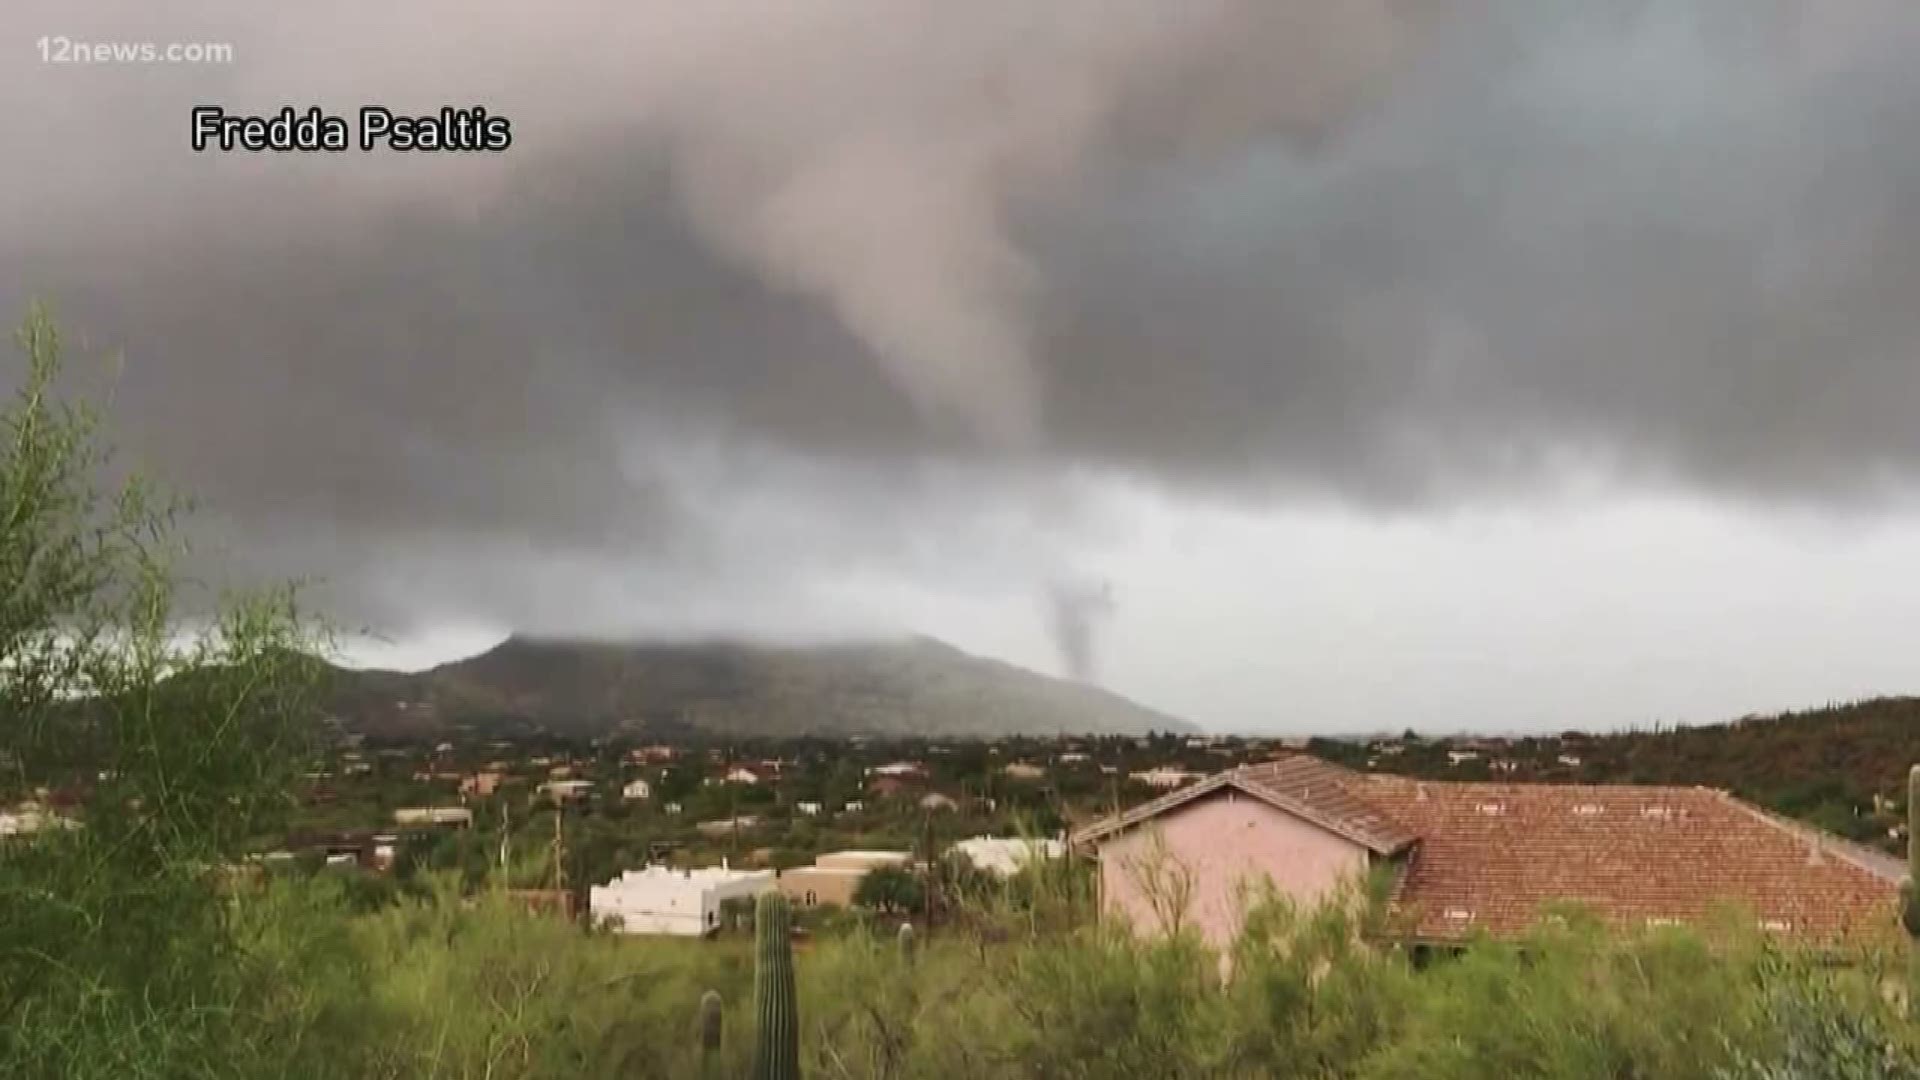 The National Weather Service says two tornados touched down in Arizona Monday. One touched down in New River, the other in Wilcox in southeast Arizona.